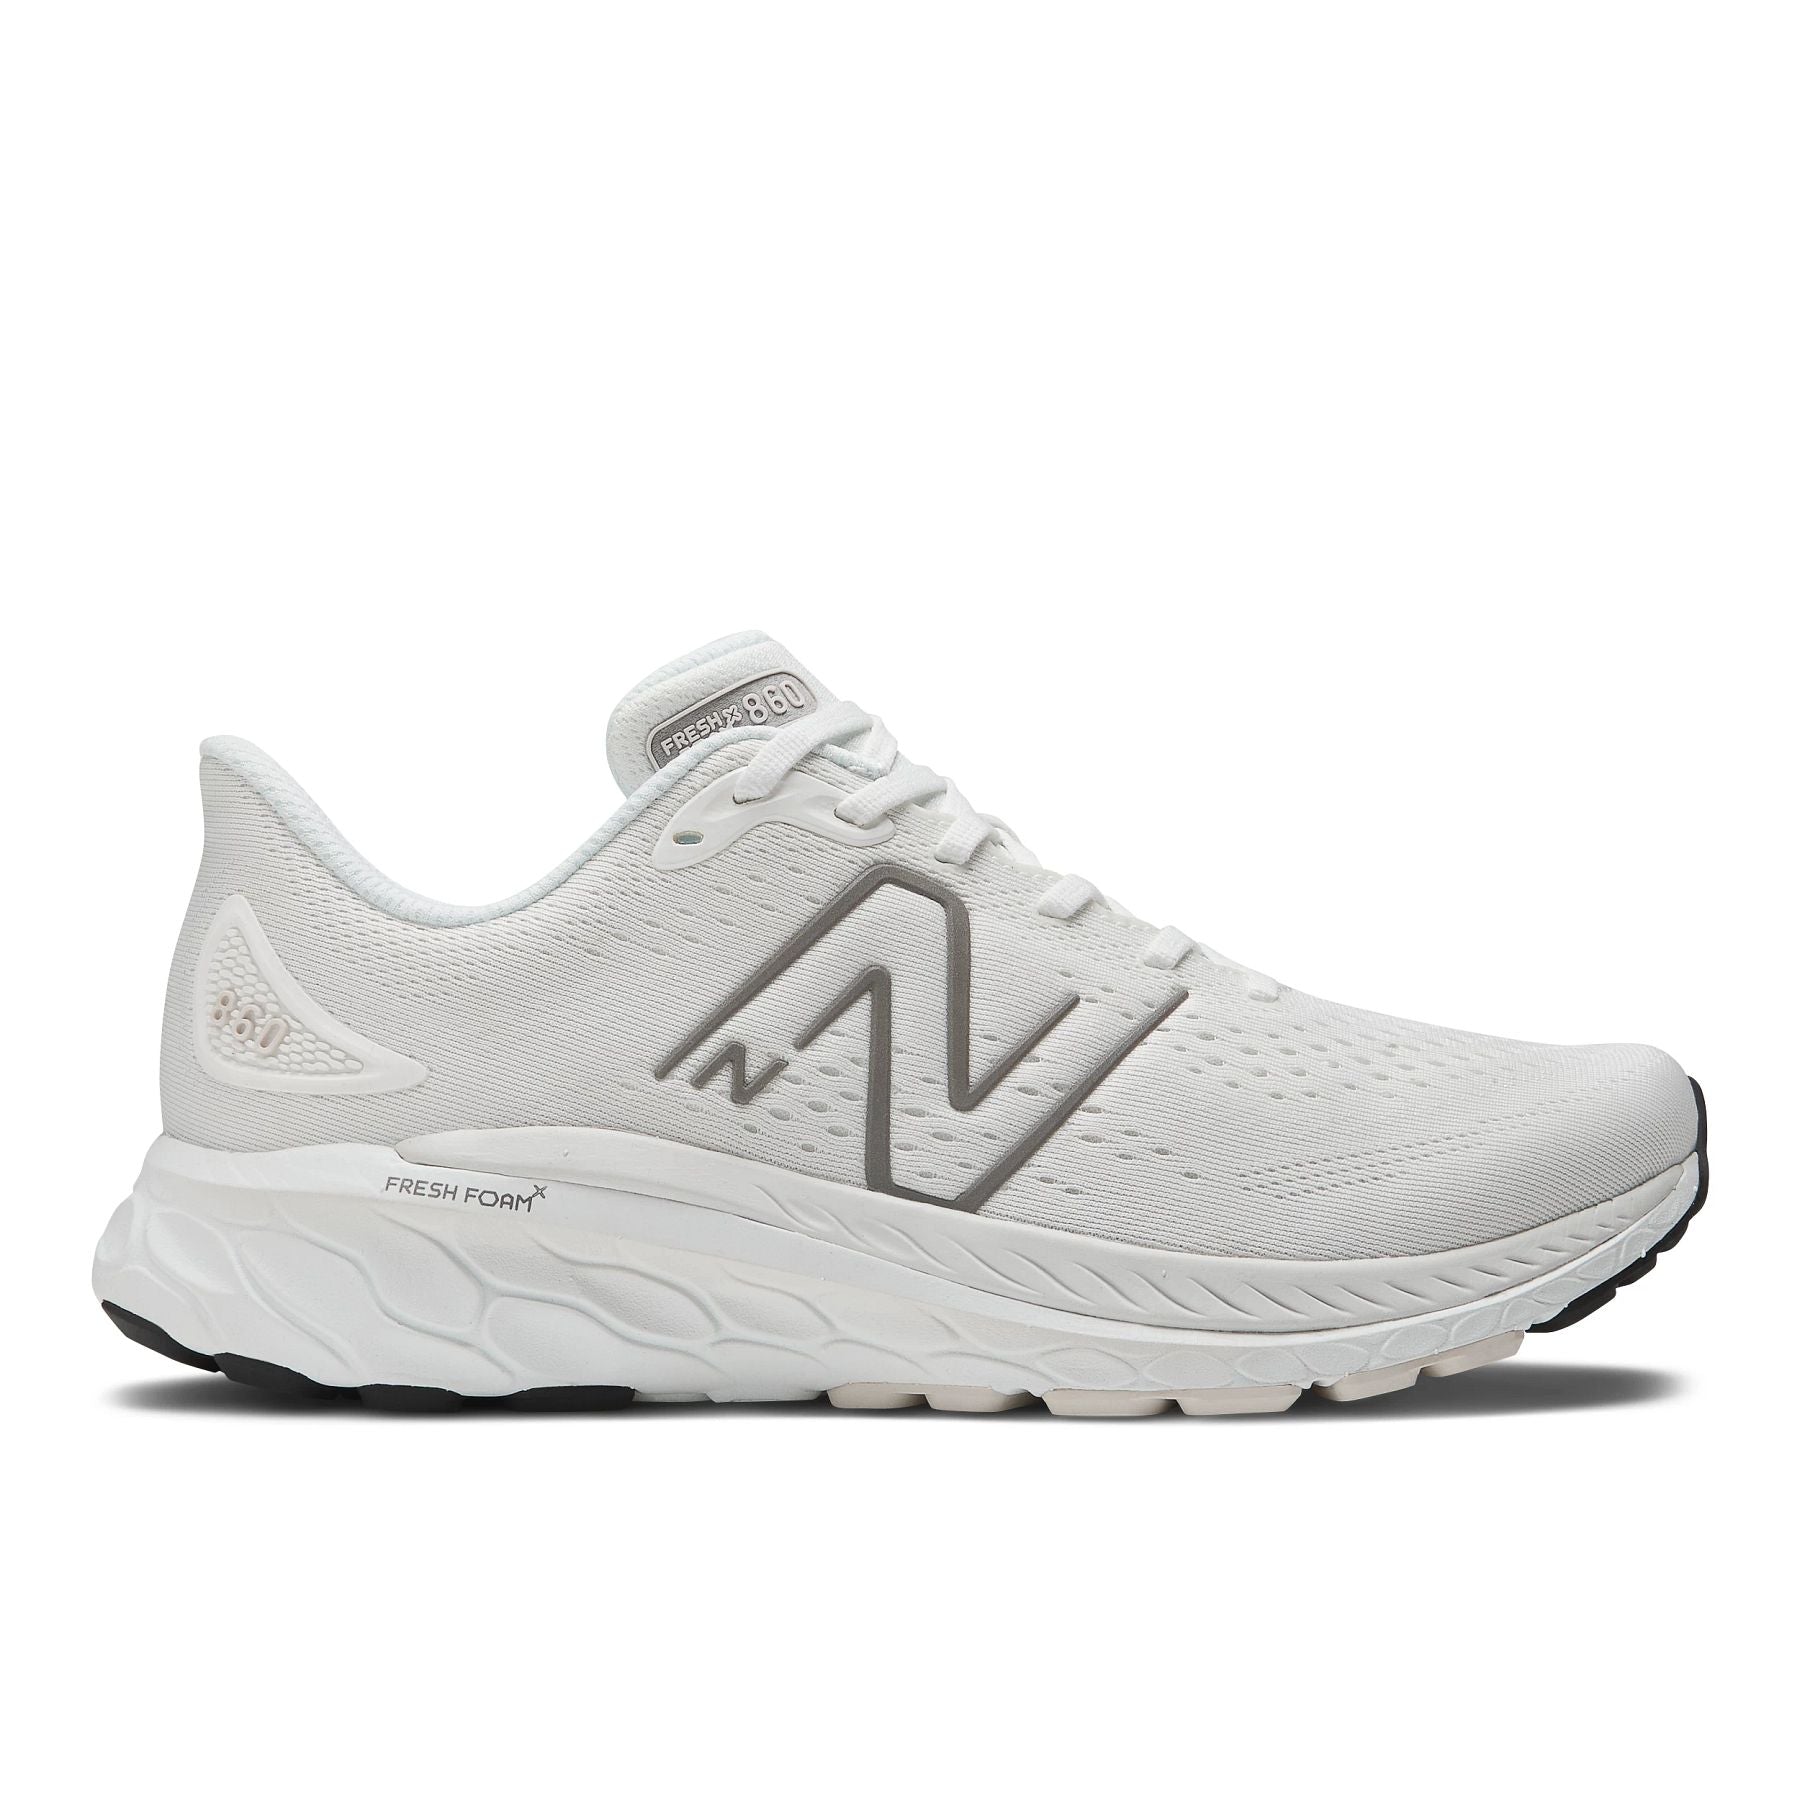 Lateral view of the Men's New Balance 860 V13 in the color White/Silver